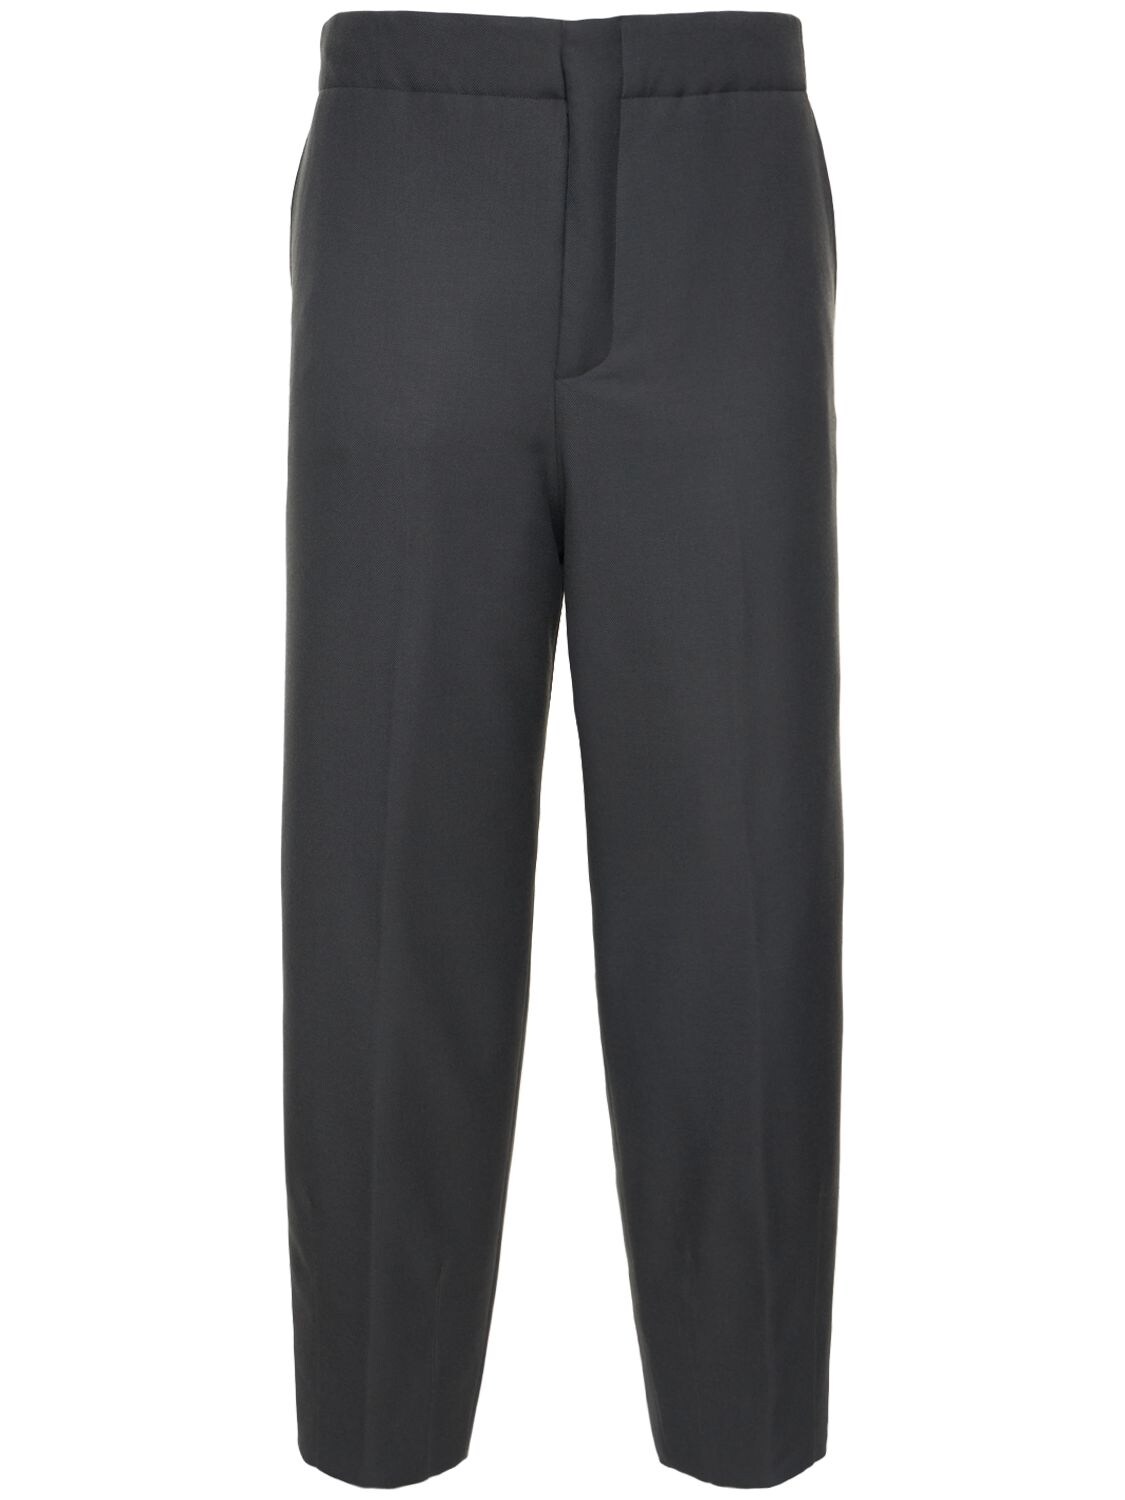 ZEGNA WOOL JOGGER trousers